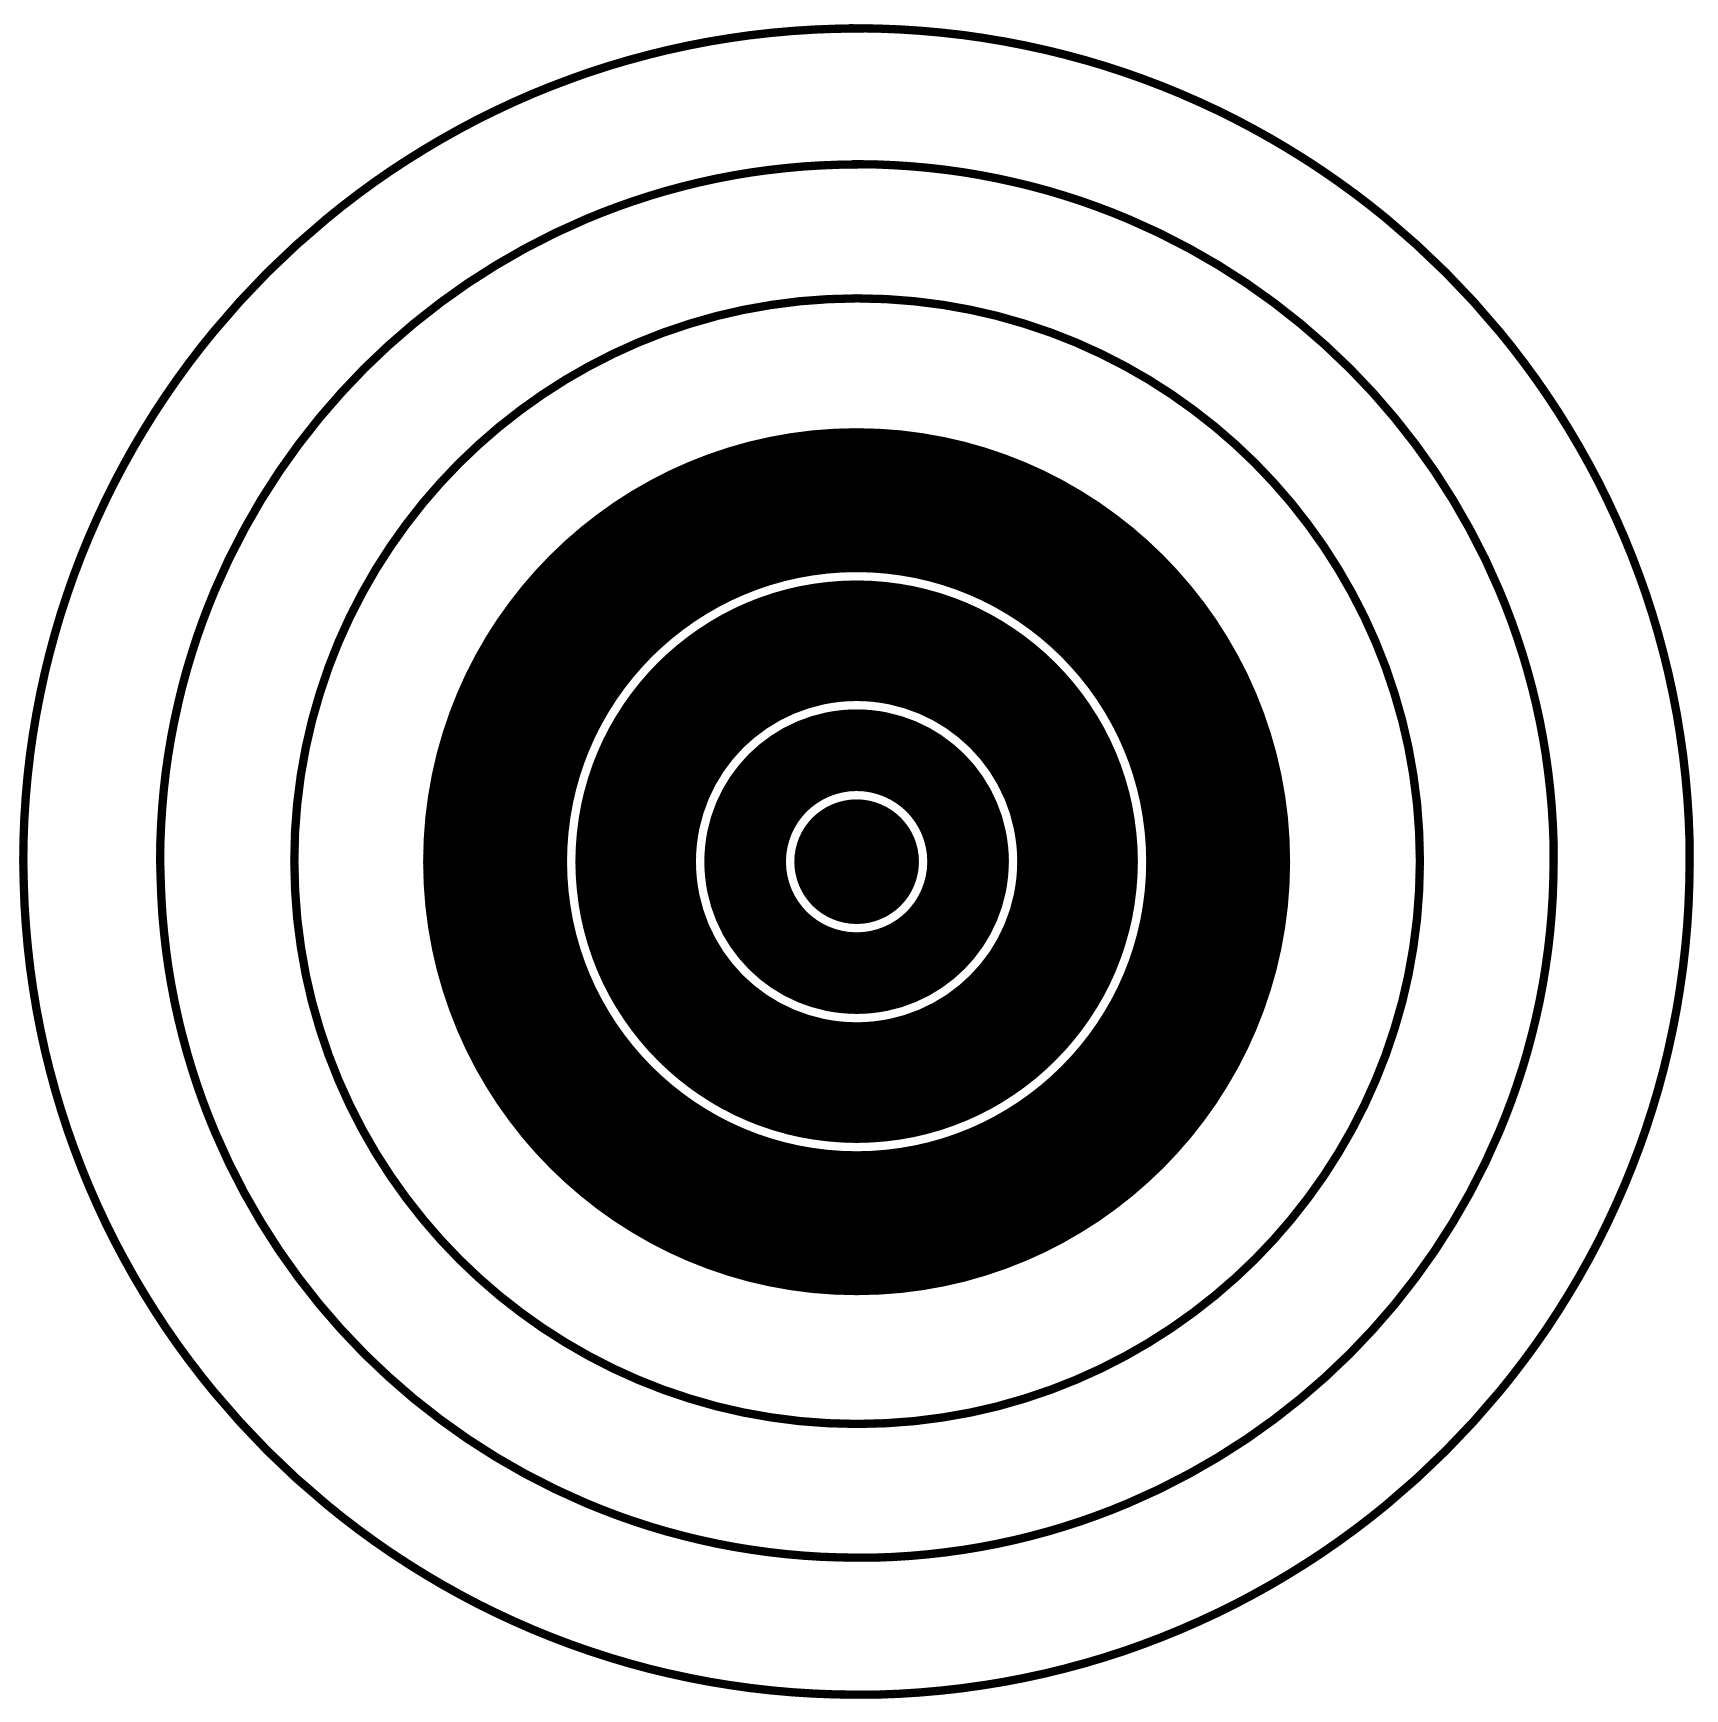 28 Bullseye Image Free Cliparts That You Can Download To You Computer    